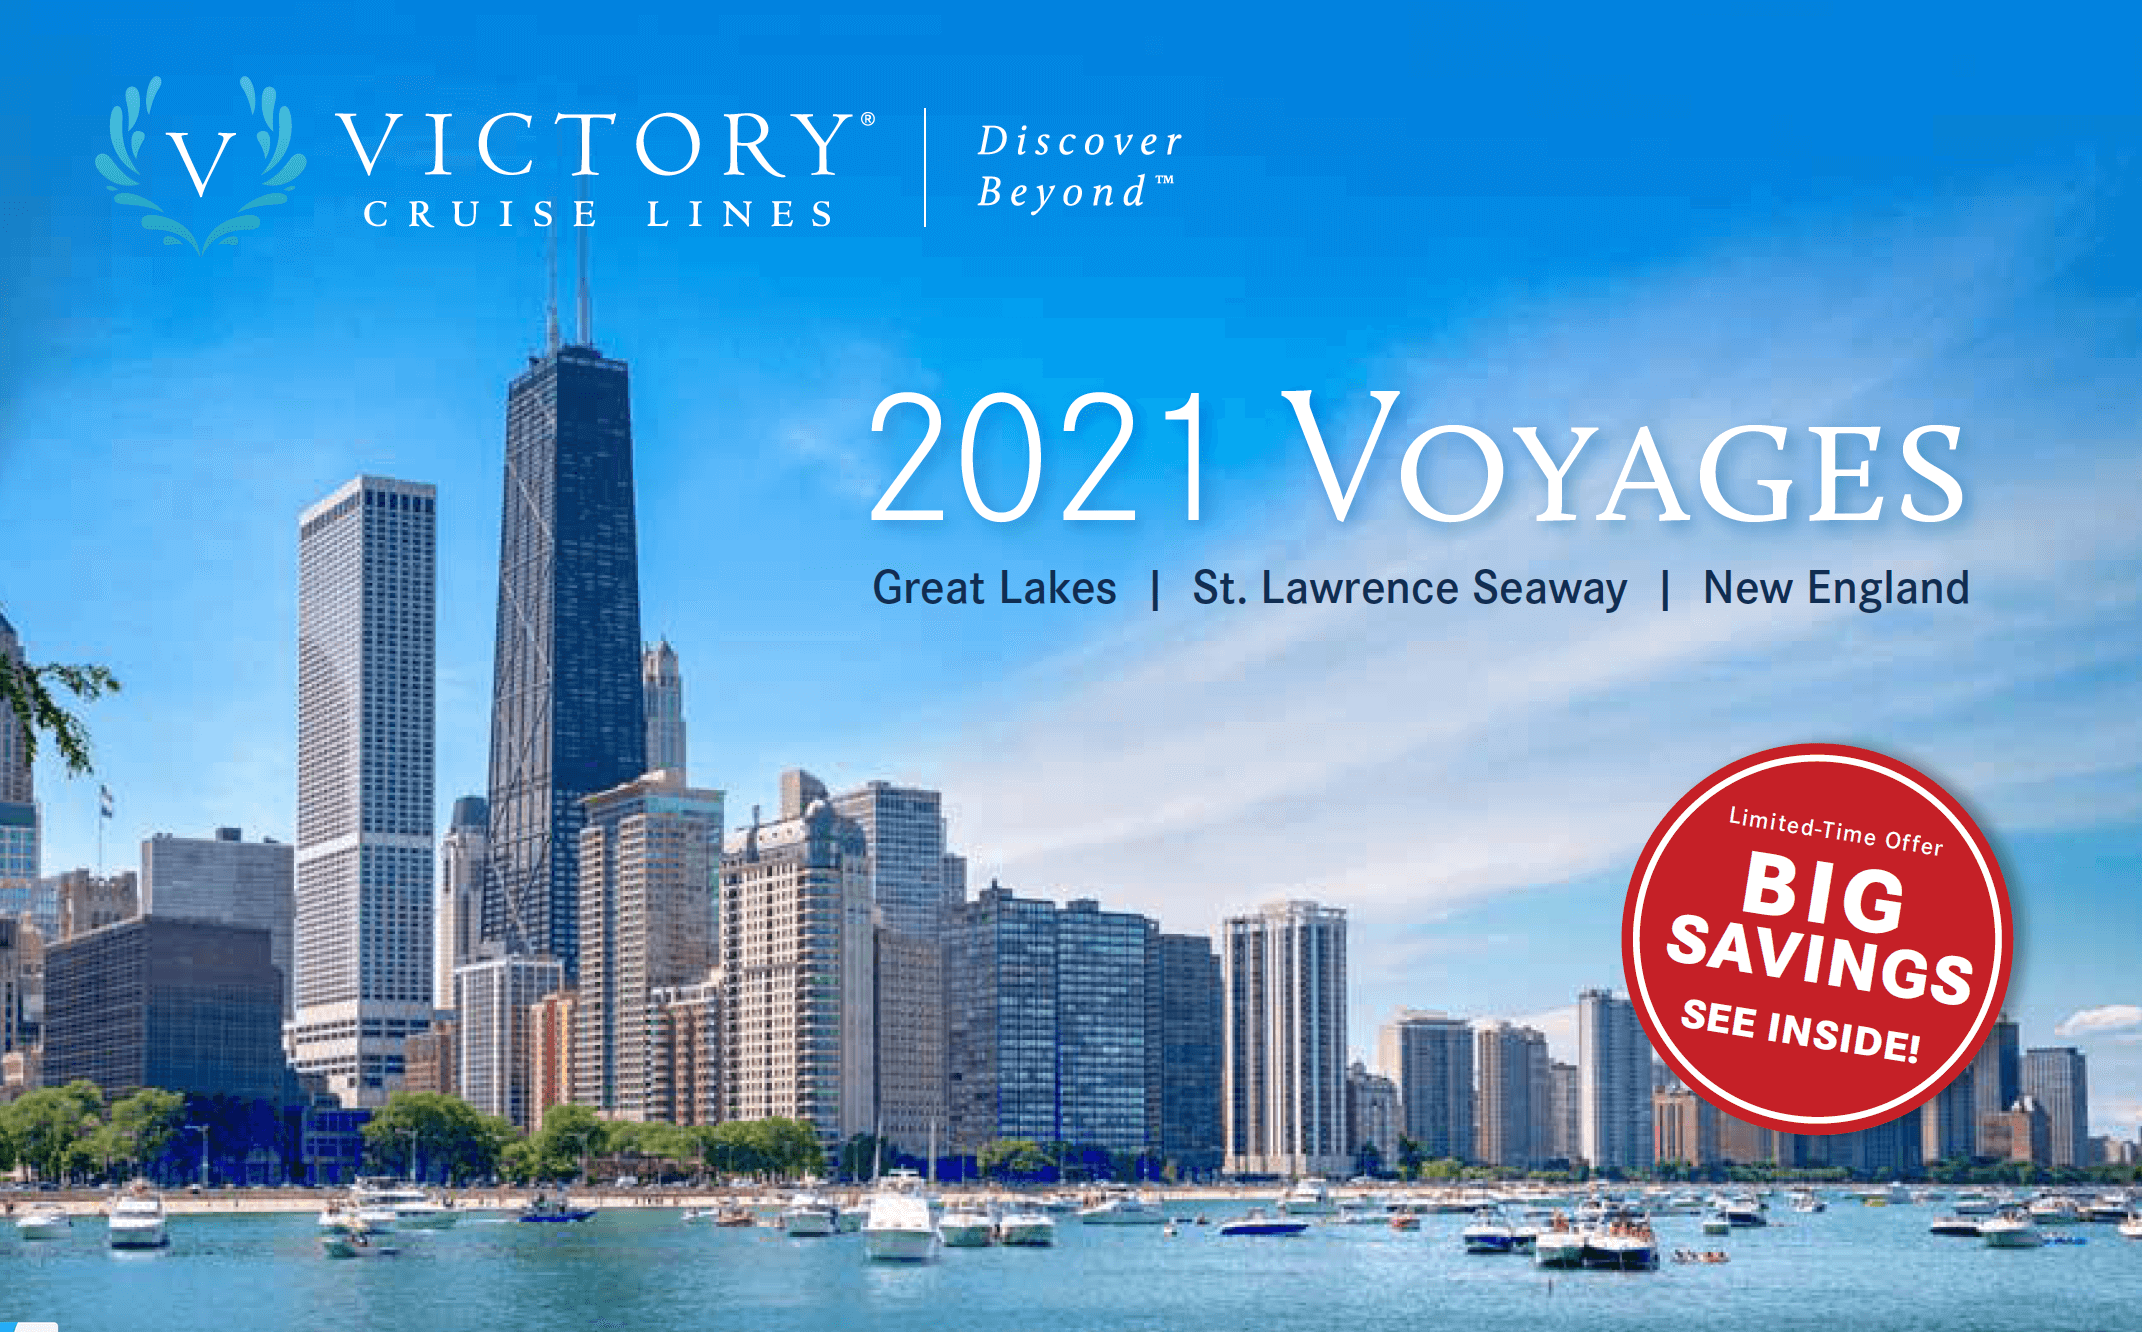 Victory Cruise Lines Great Lakes brochure cover 2021